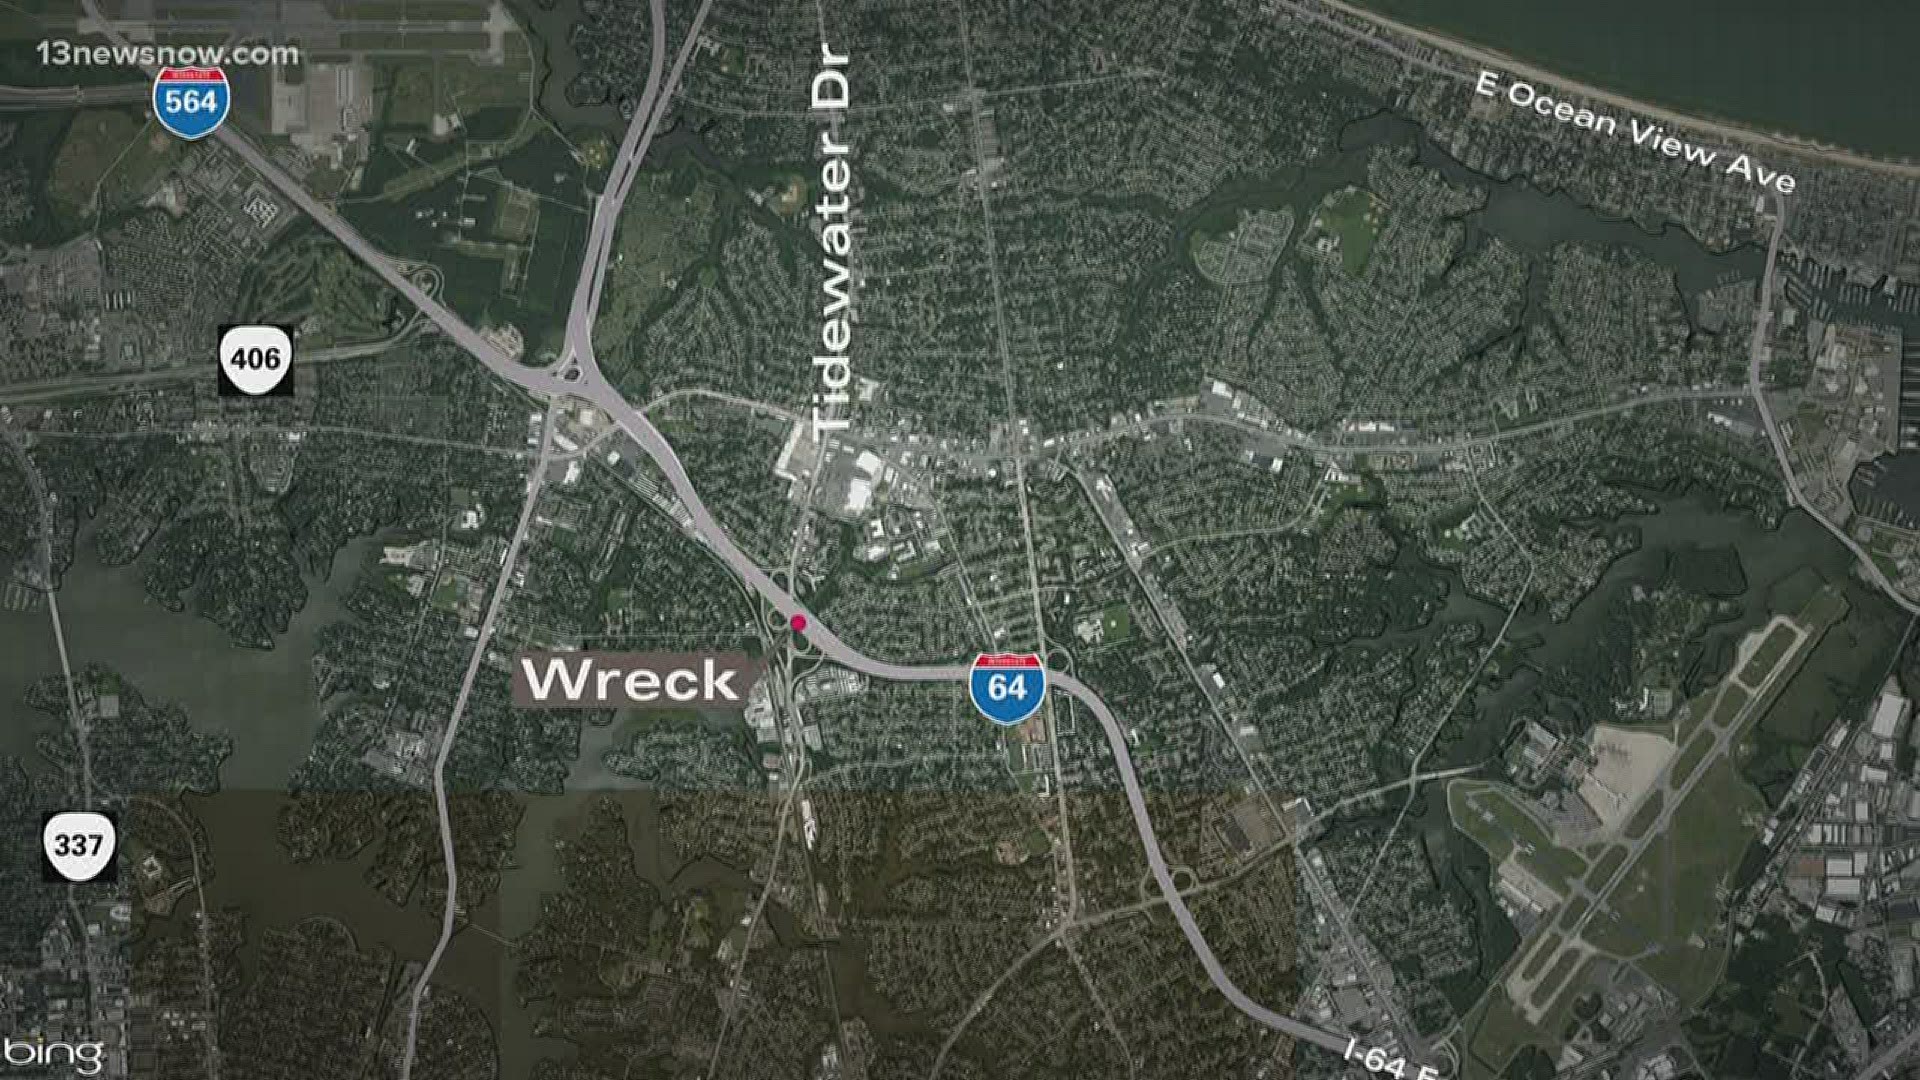 Authorities are investigating a single-car accident on 1-64 West that left a Newport News man dead.